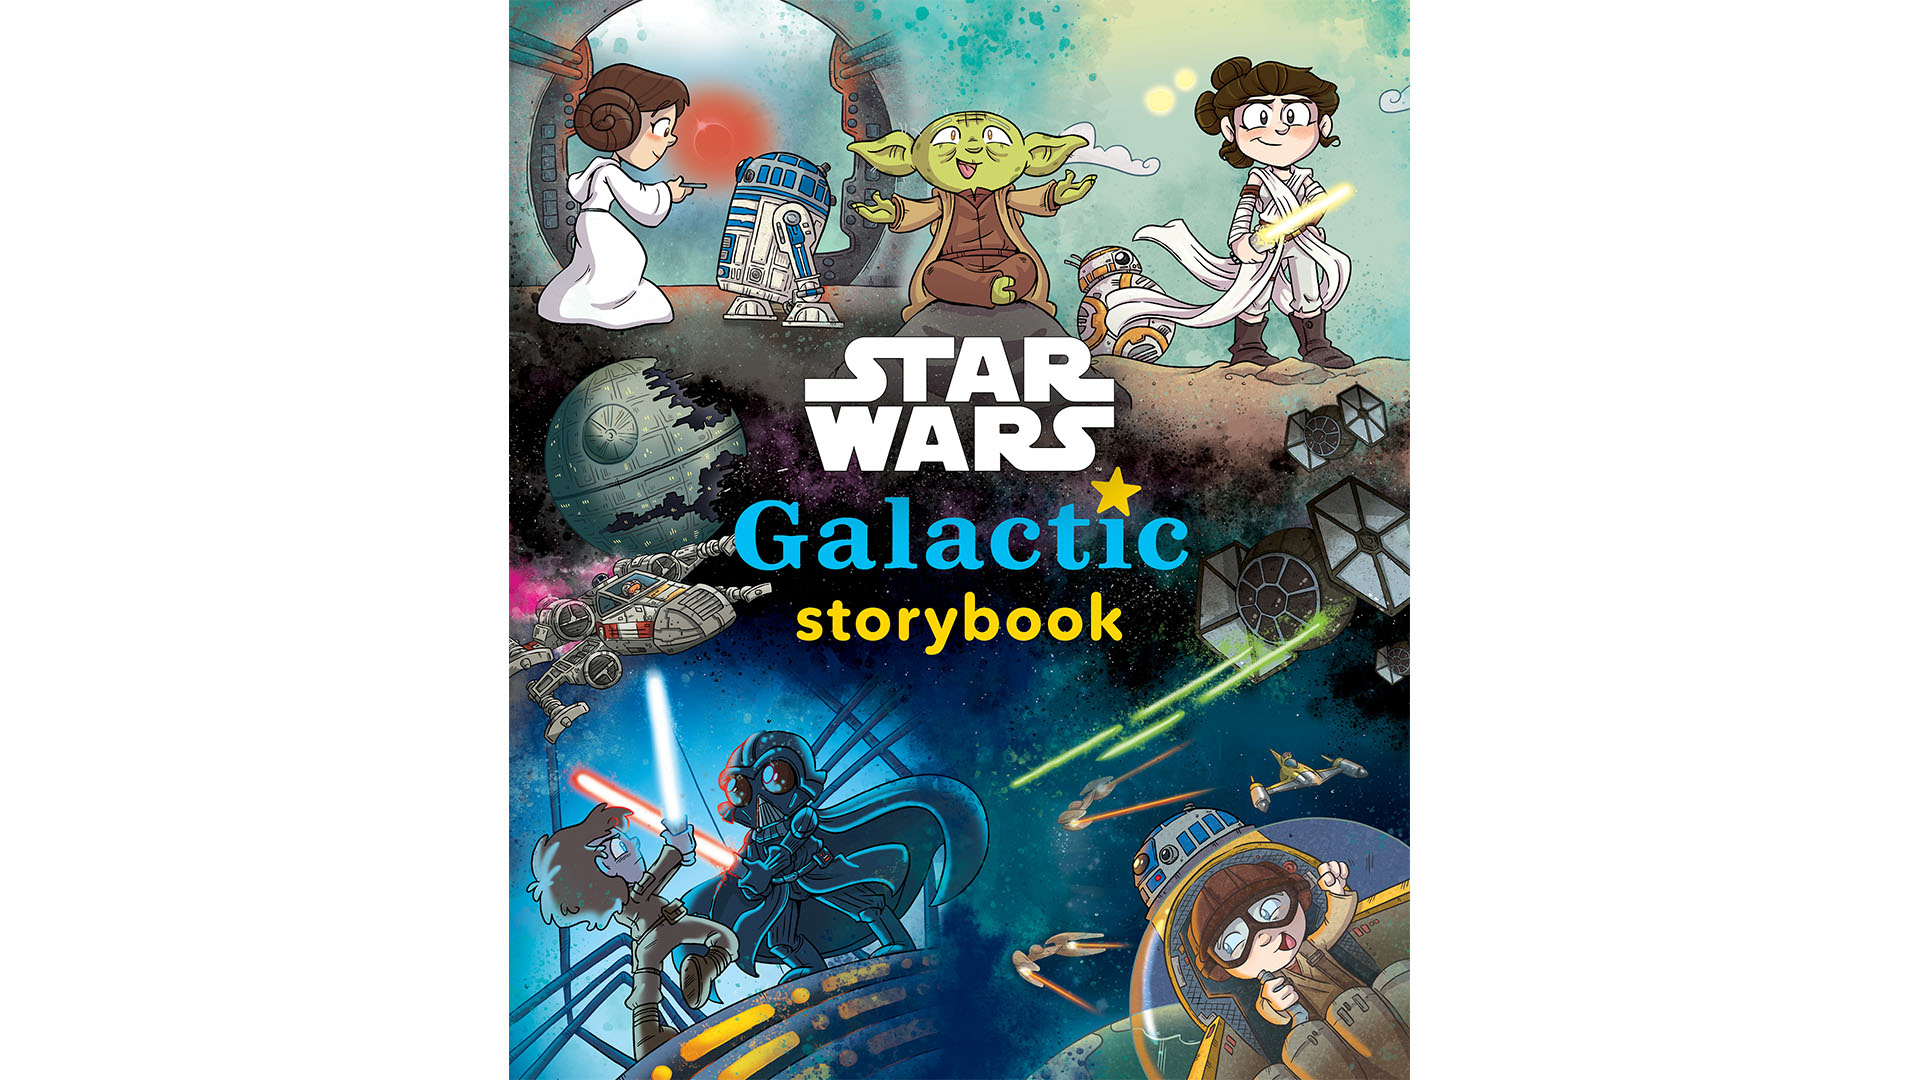 The cover of Star Wars Galactic Storybook, a children's book written by Lucasfilm Press and illustrated by Katie Cook